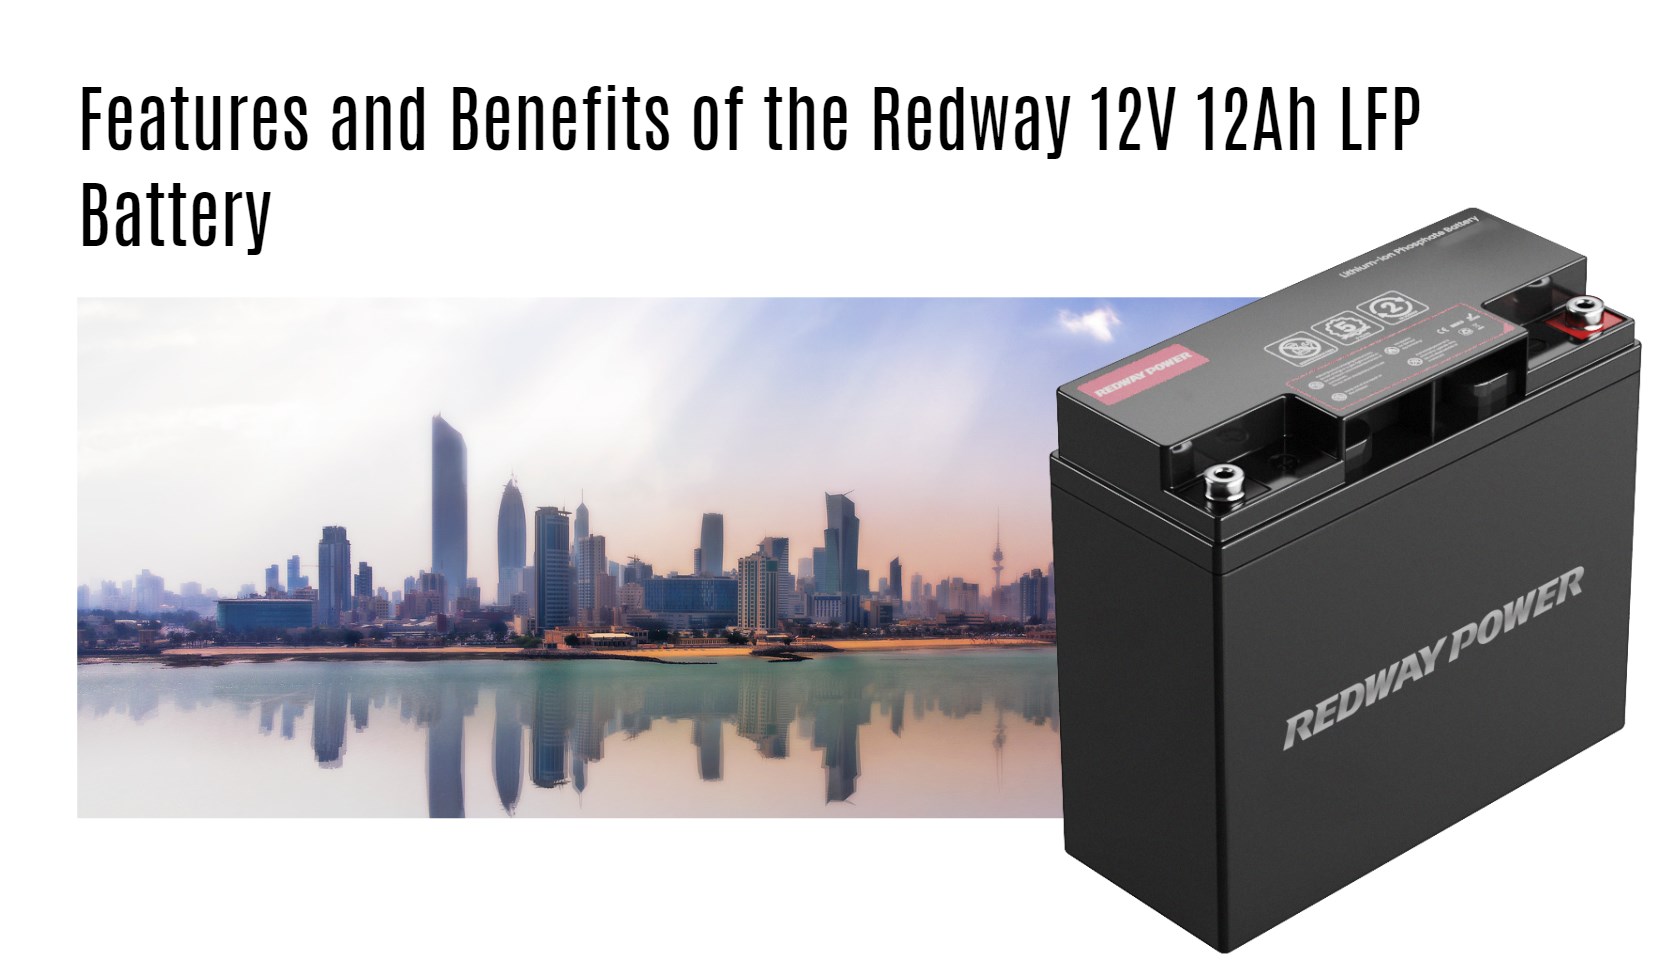 Features and Benefits of the Redway 12V 12Ah LFP Battery